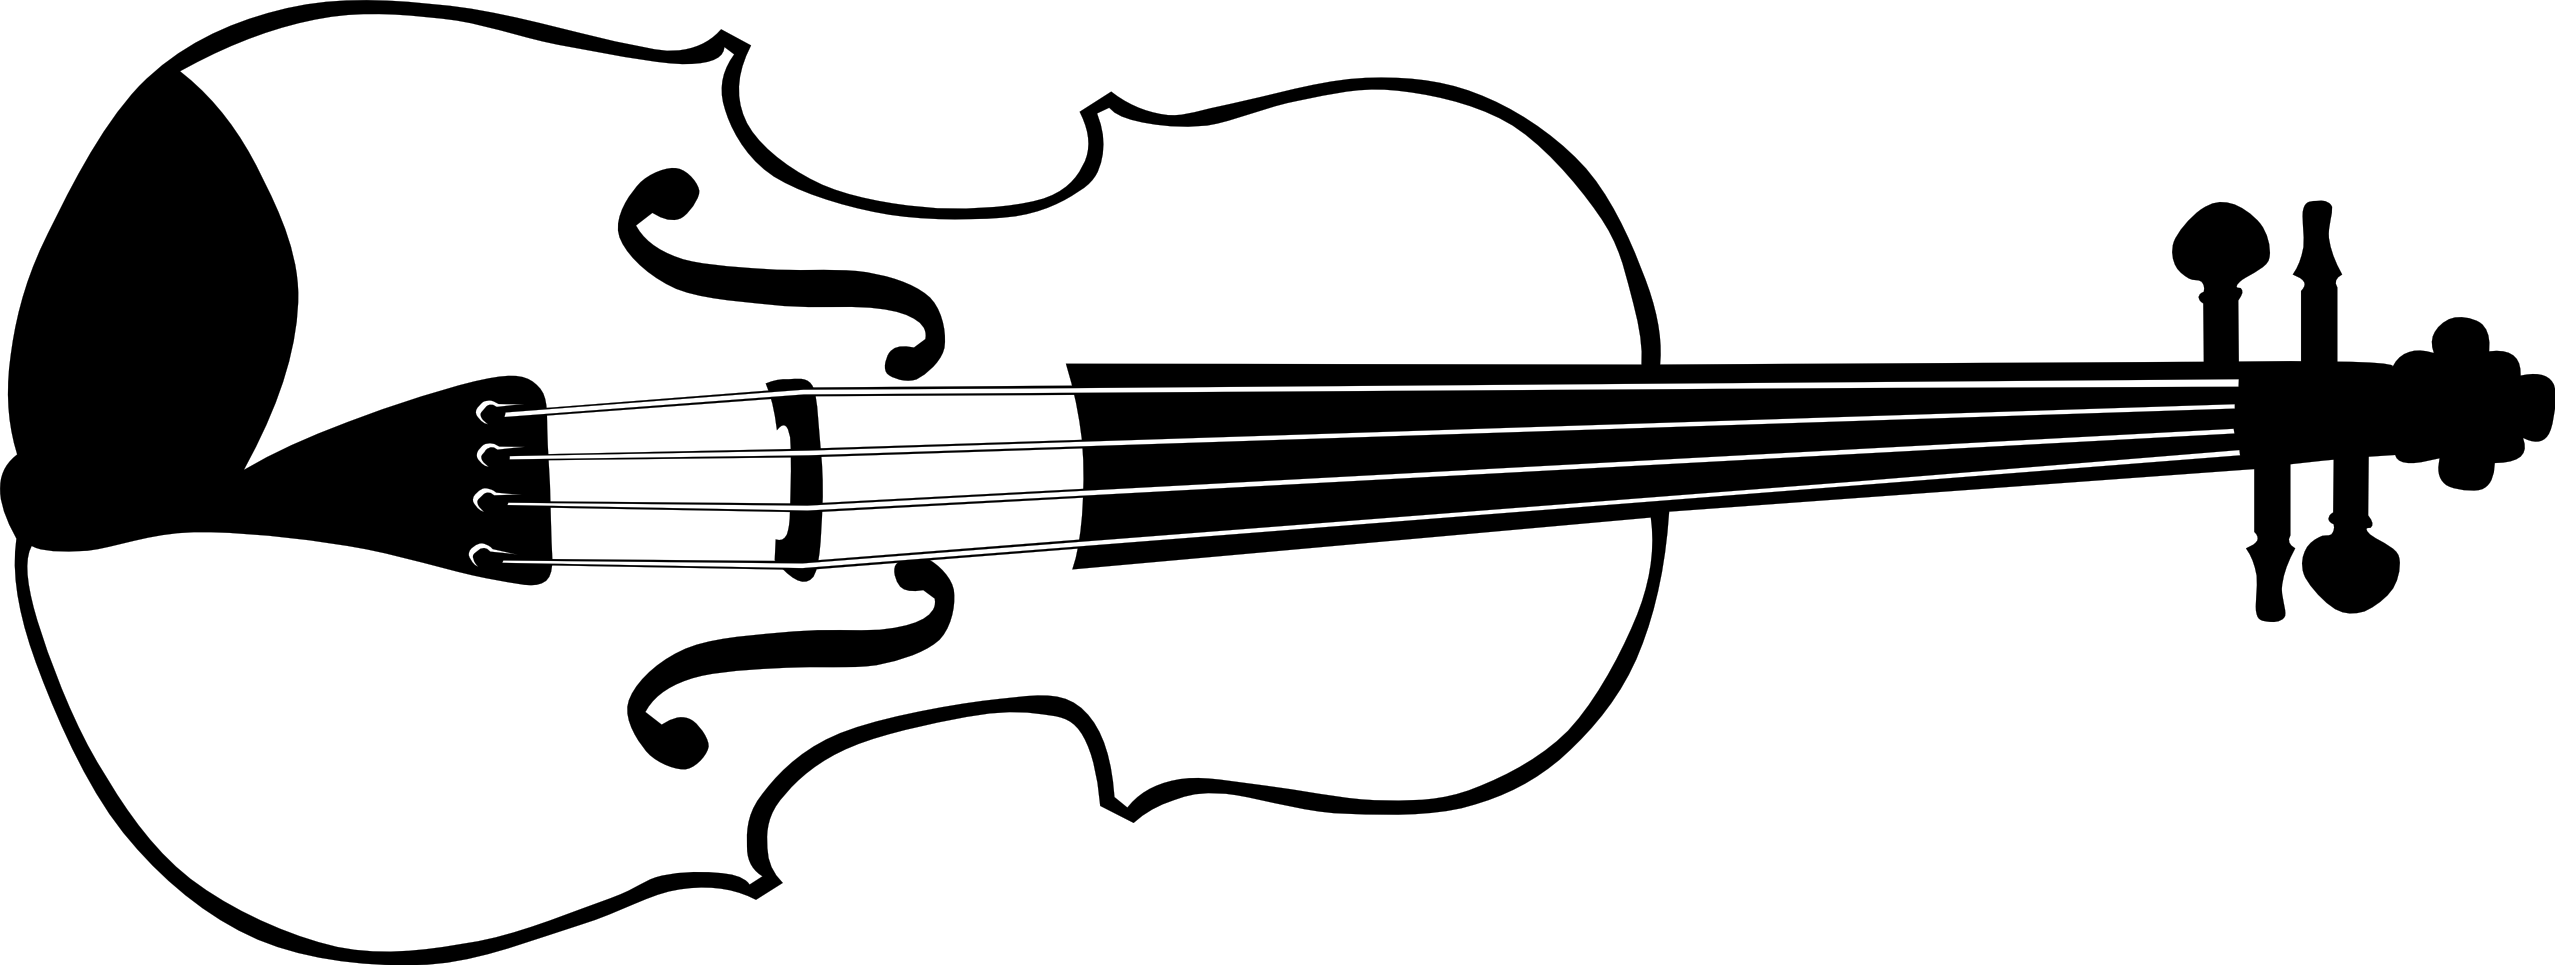 Violin Clipart Black And White | Clipart library - Free Clipart Images